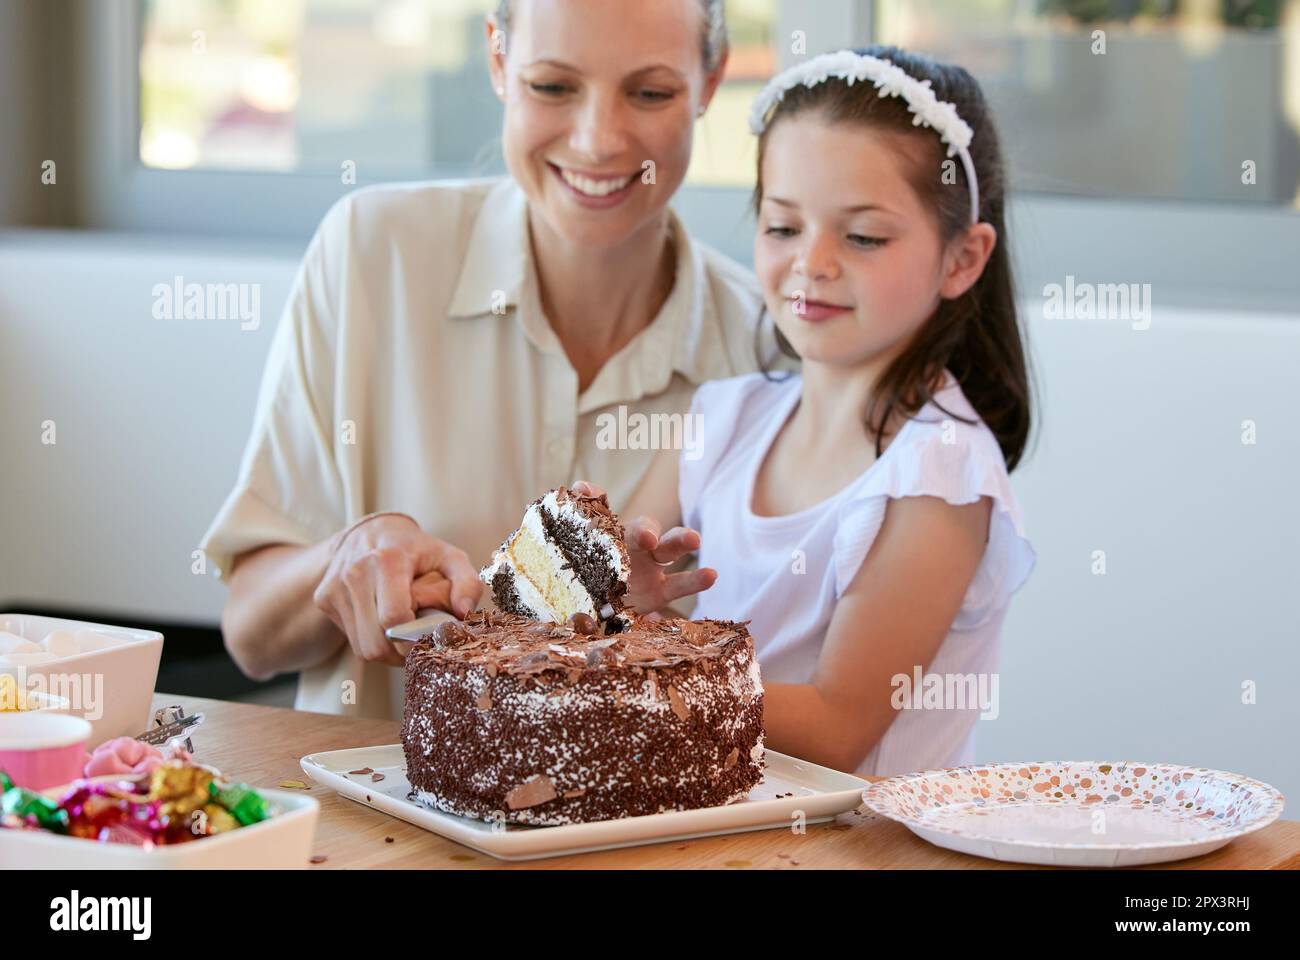 You get the first piece. a little girl celebrating her birthday at home Stock Photo